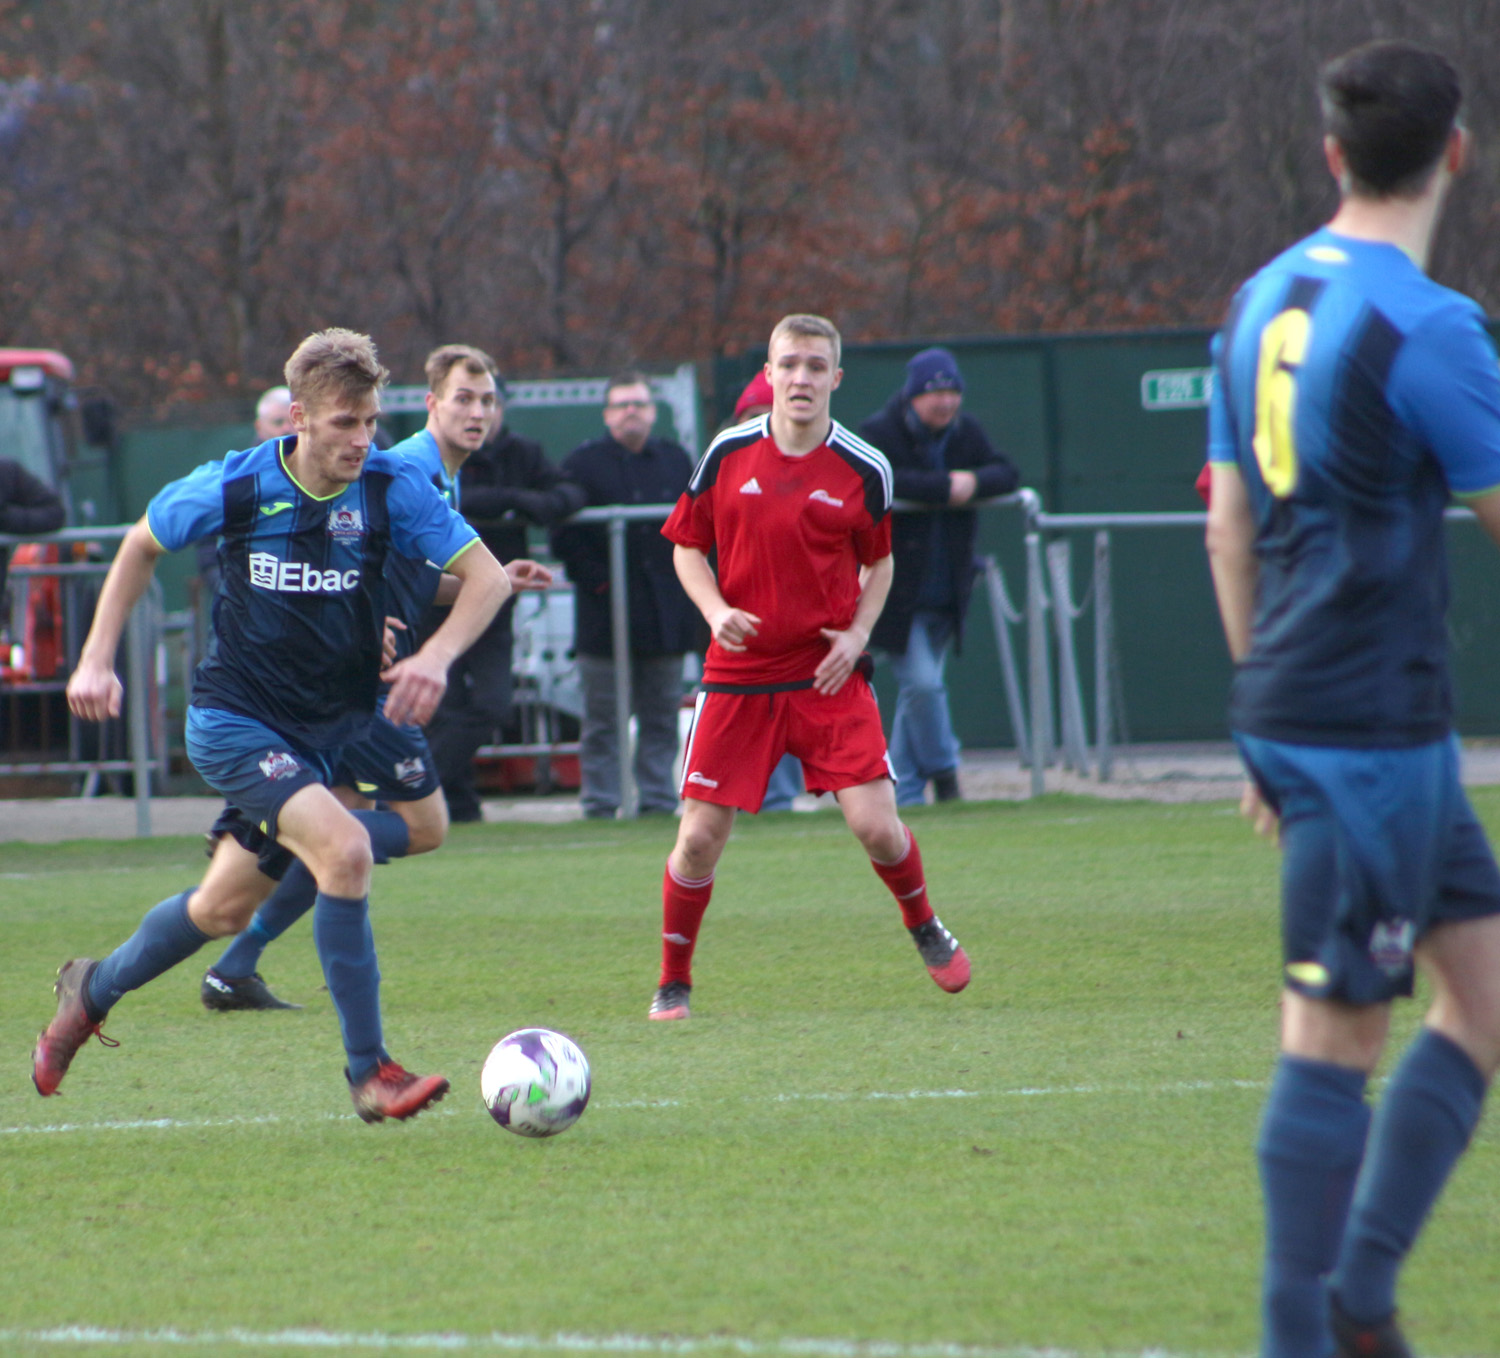 Aycliffe FC Draw with Northumbria University